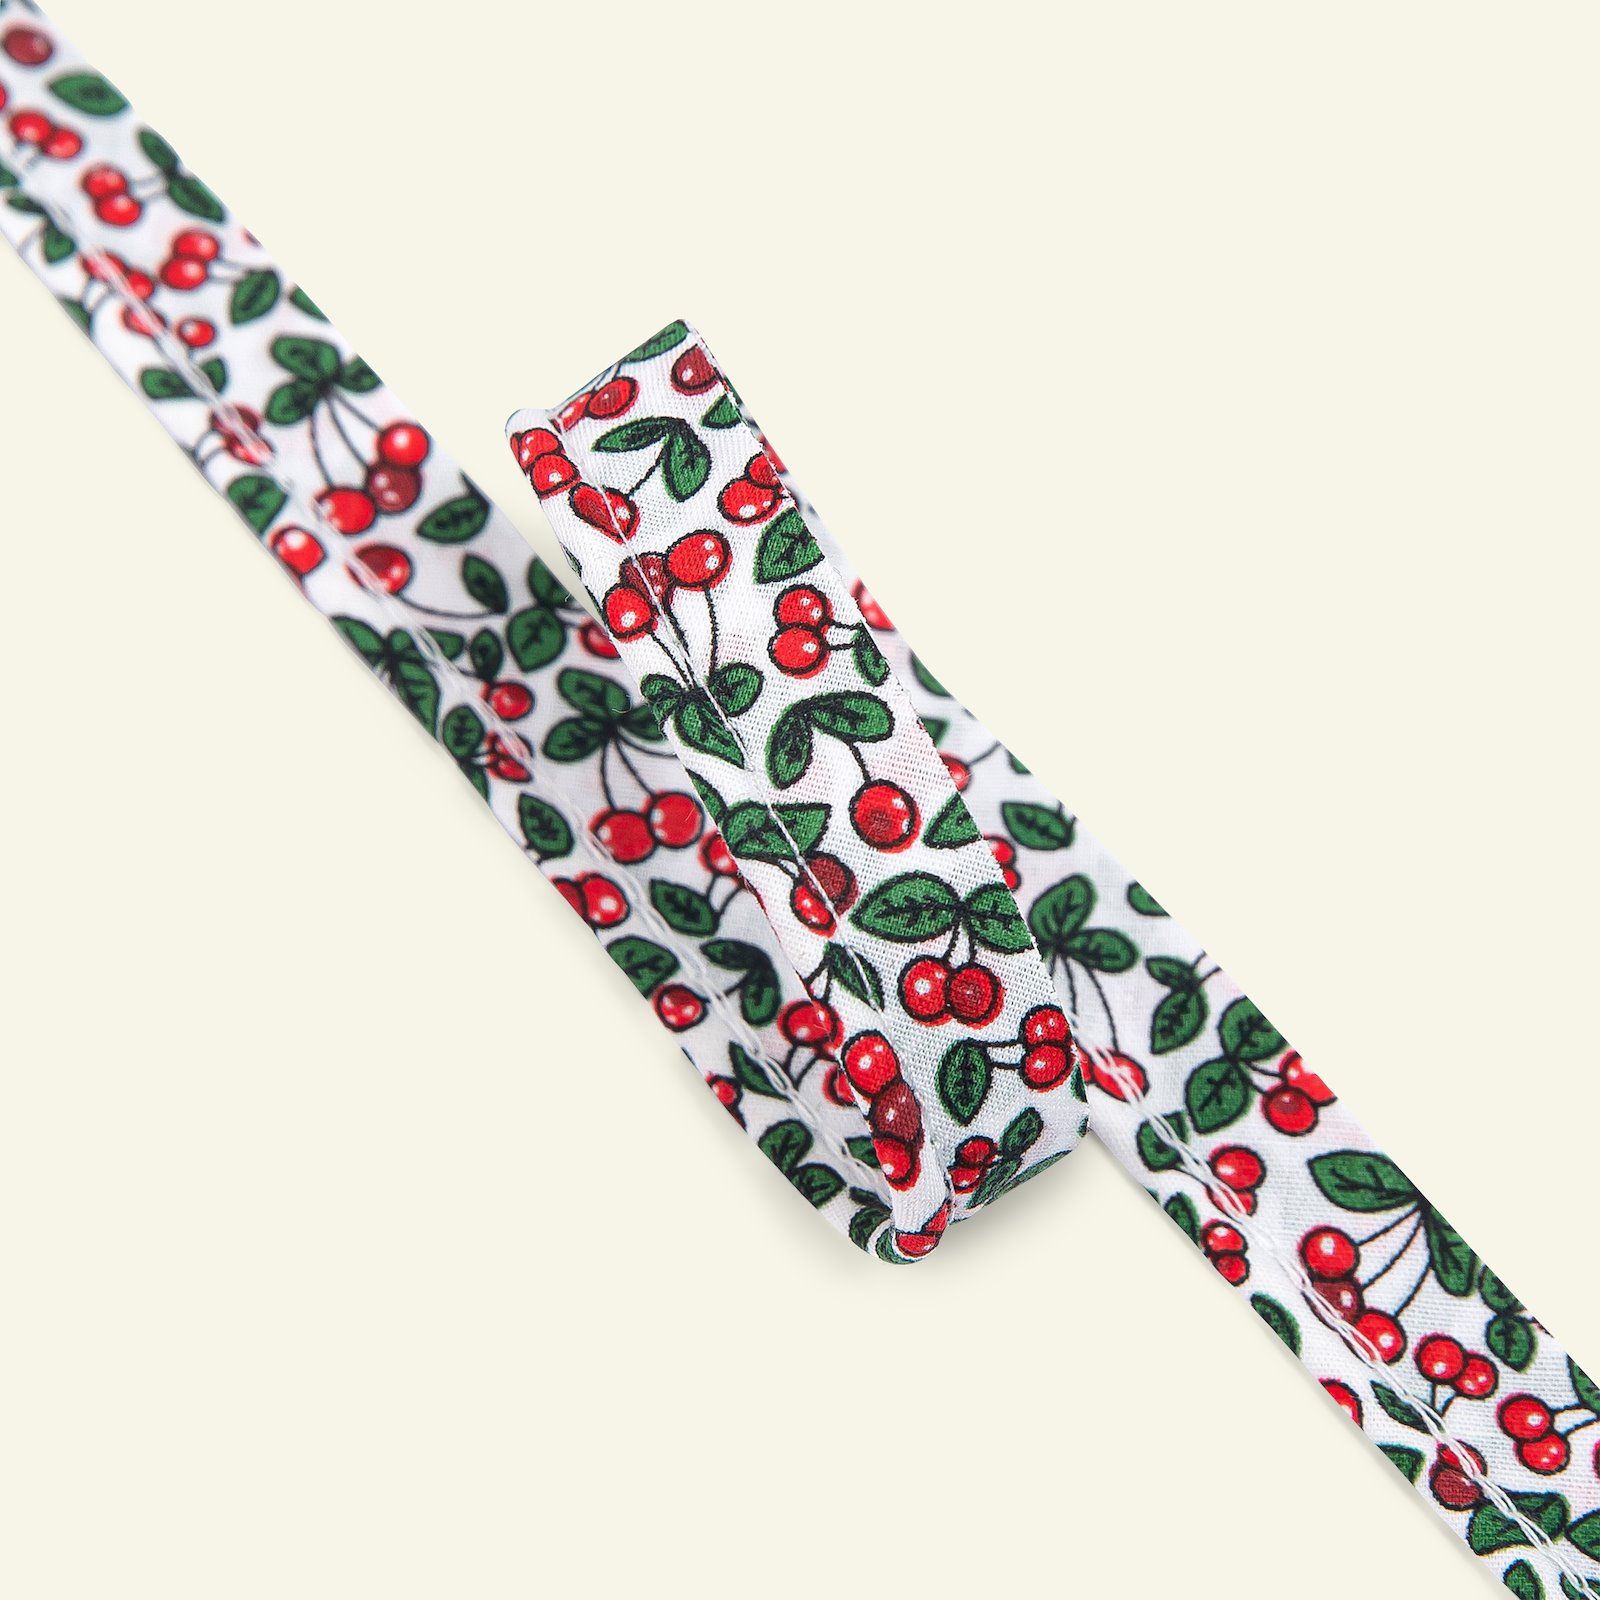 Piping 4mm cherries red/white/green 3m 71311_pack